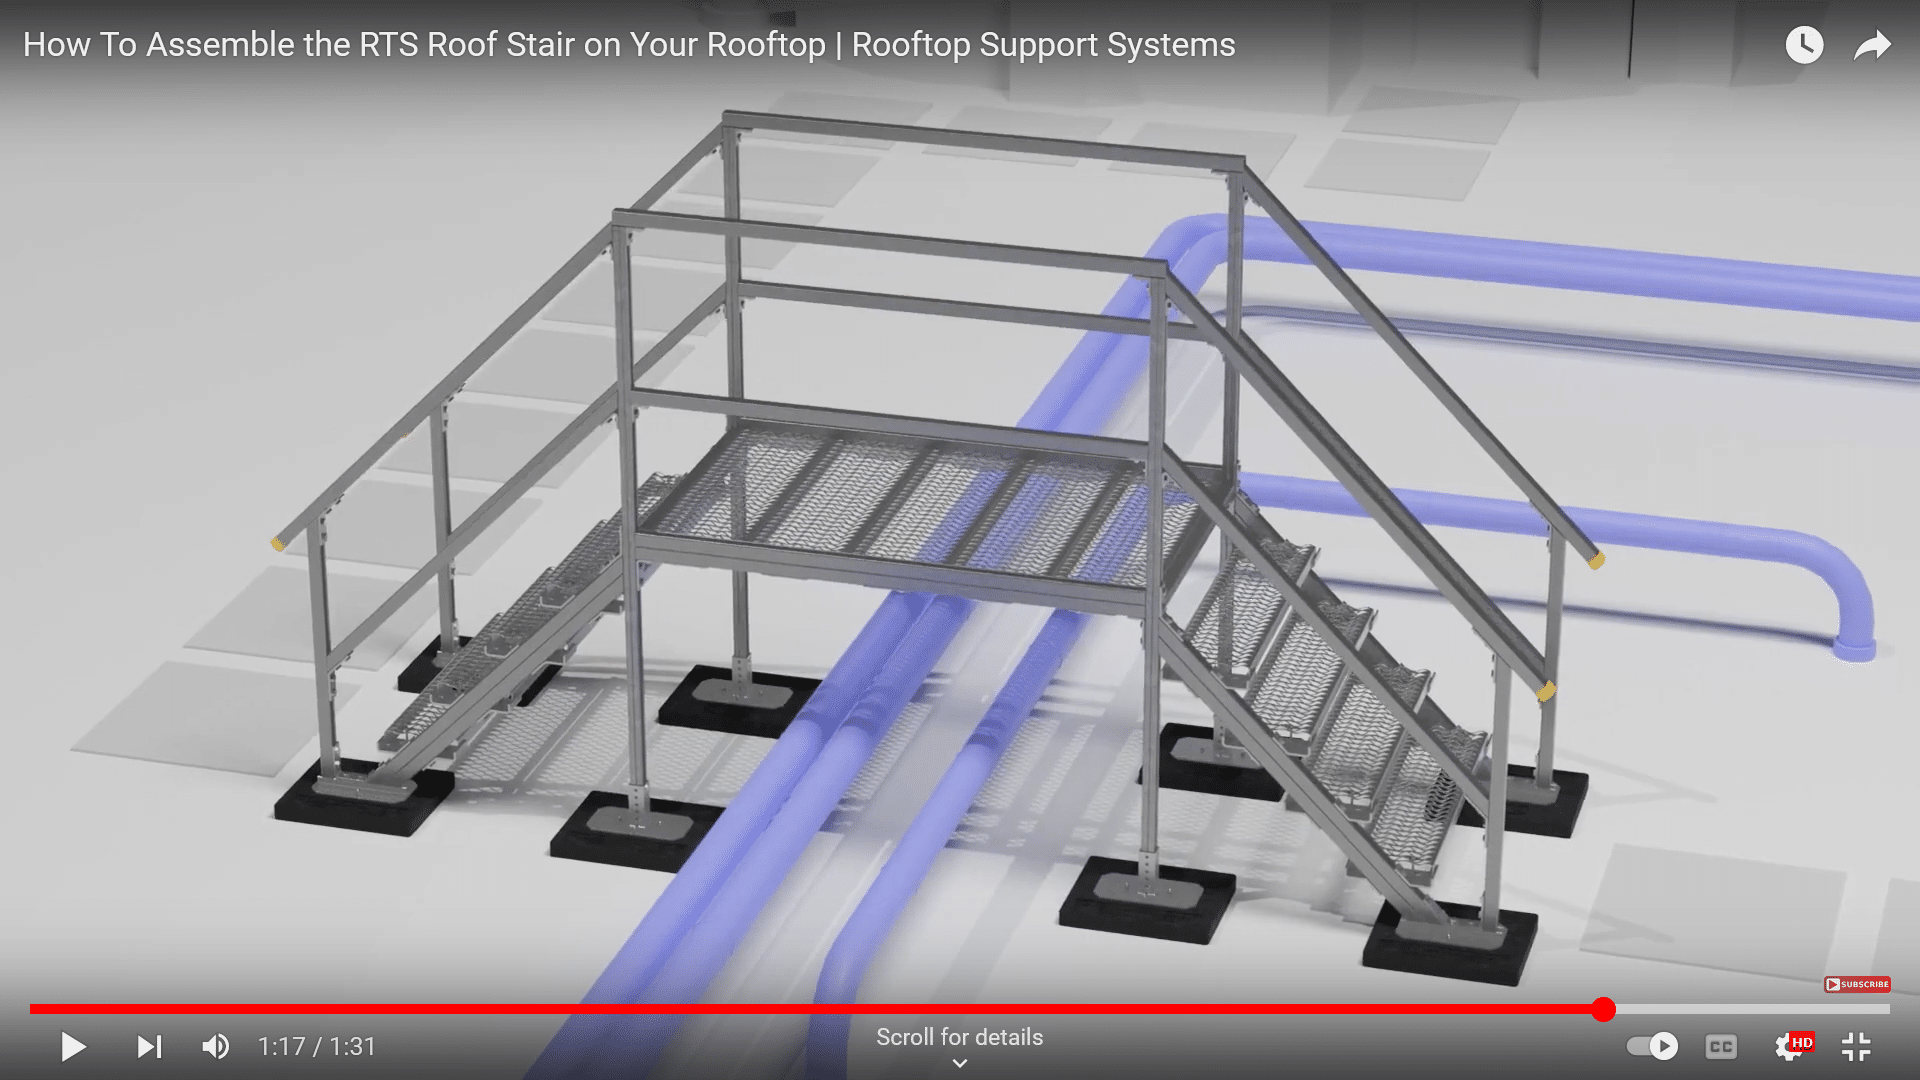 Roof Stairs Video Still Image YouTube | RTS | Rooftop Support Systems | a Division of Eberl Iron Works, Inc. | Buffalo, NY